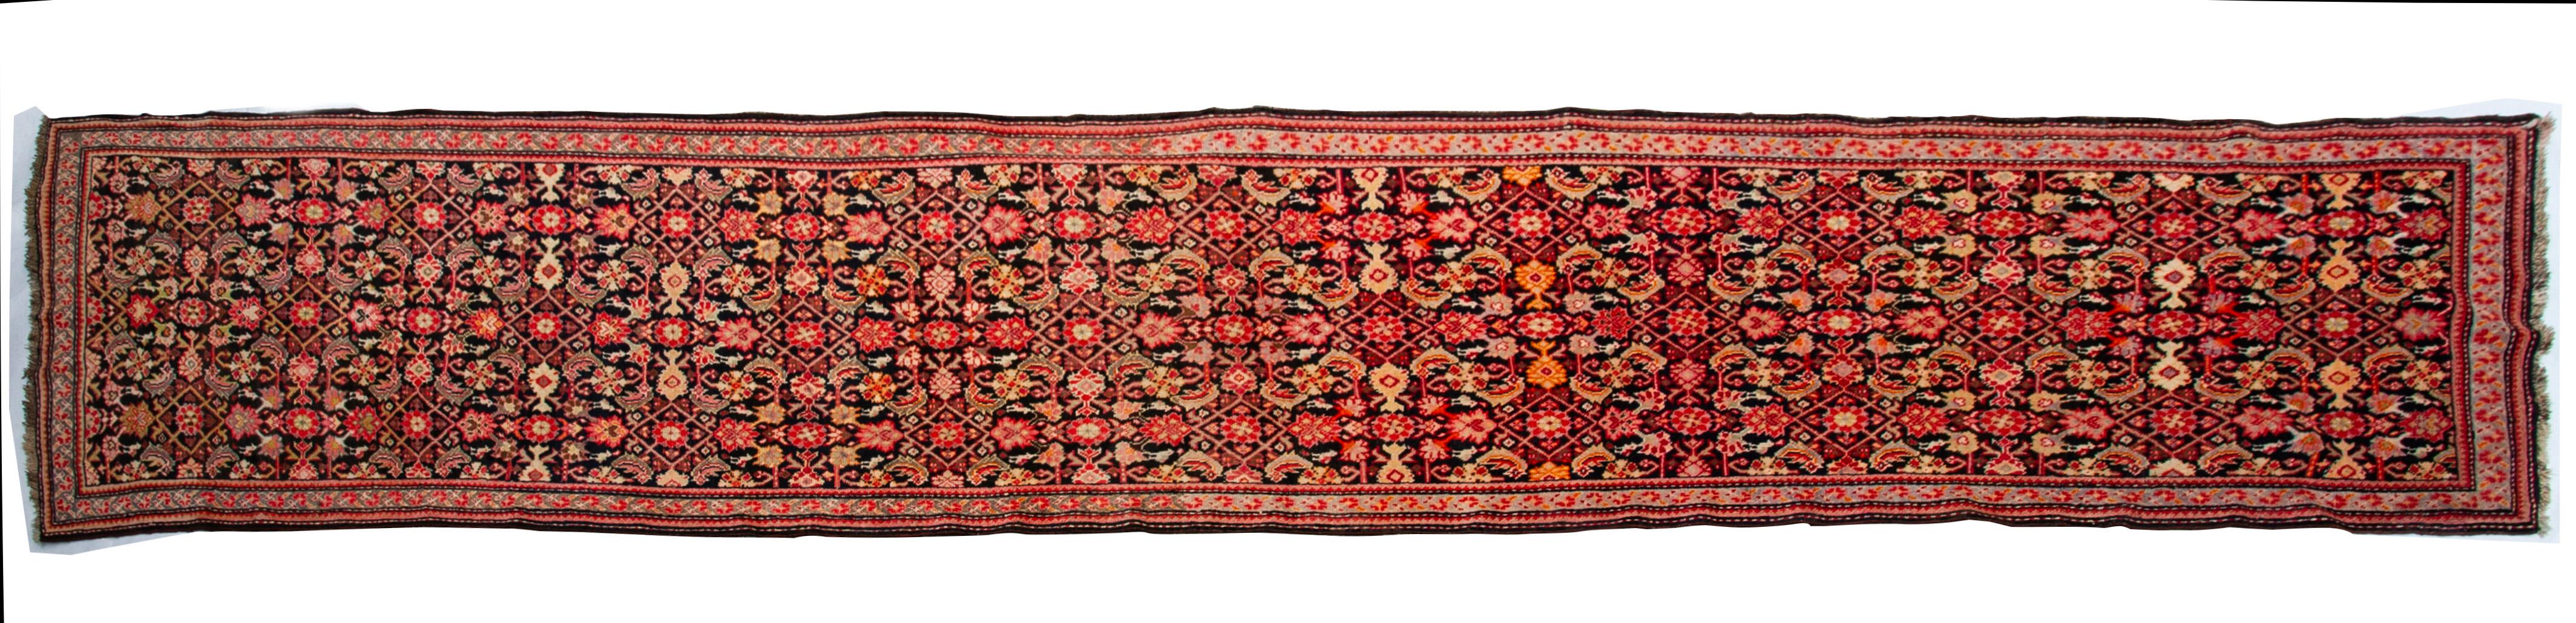 Nr. 1068 -  Beige and red minute design on a black background for this elegant Caucasian Karebagh (or Garebagh) Shusha runner : dated 1318 and signed .  With a  thick red and  an ivory 